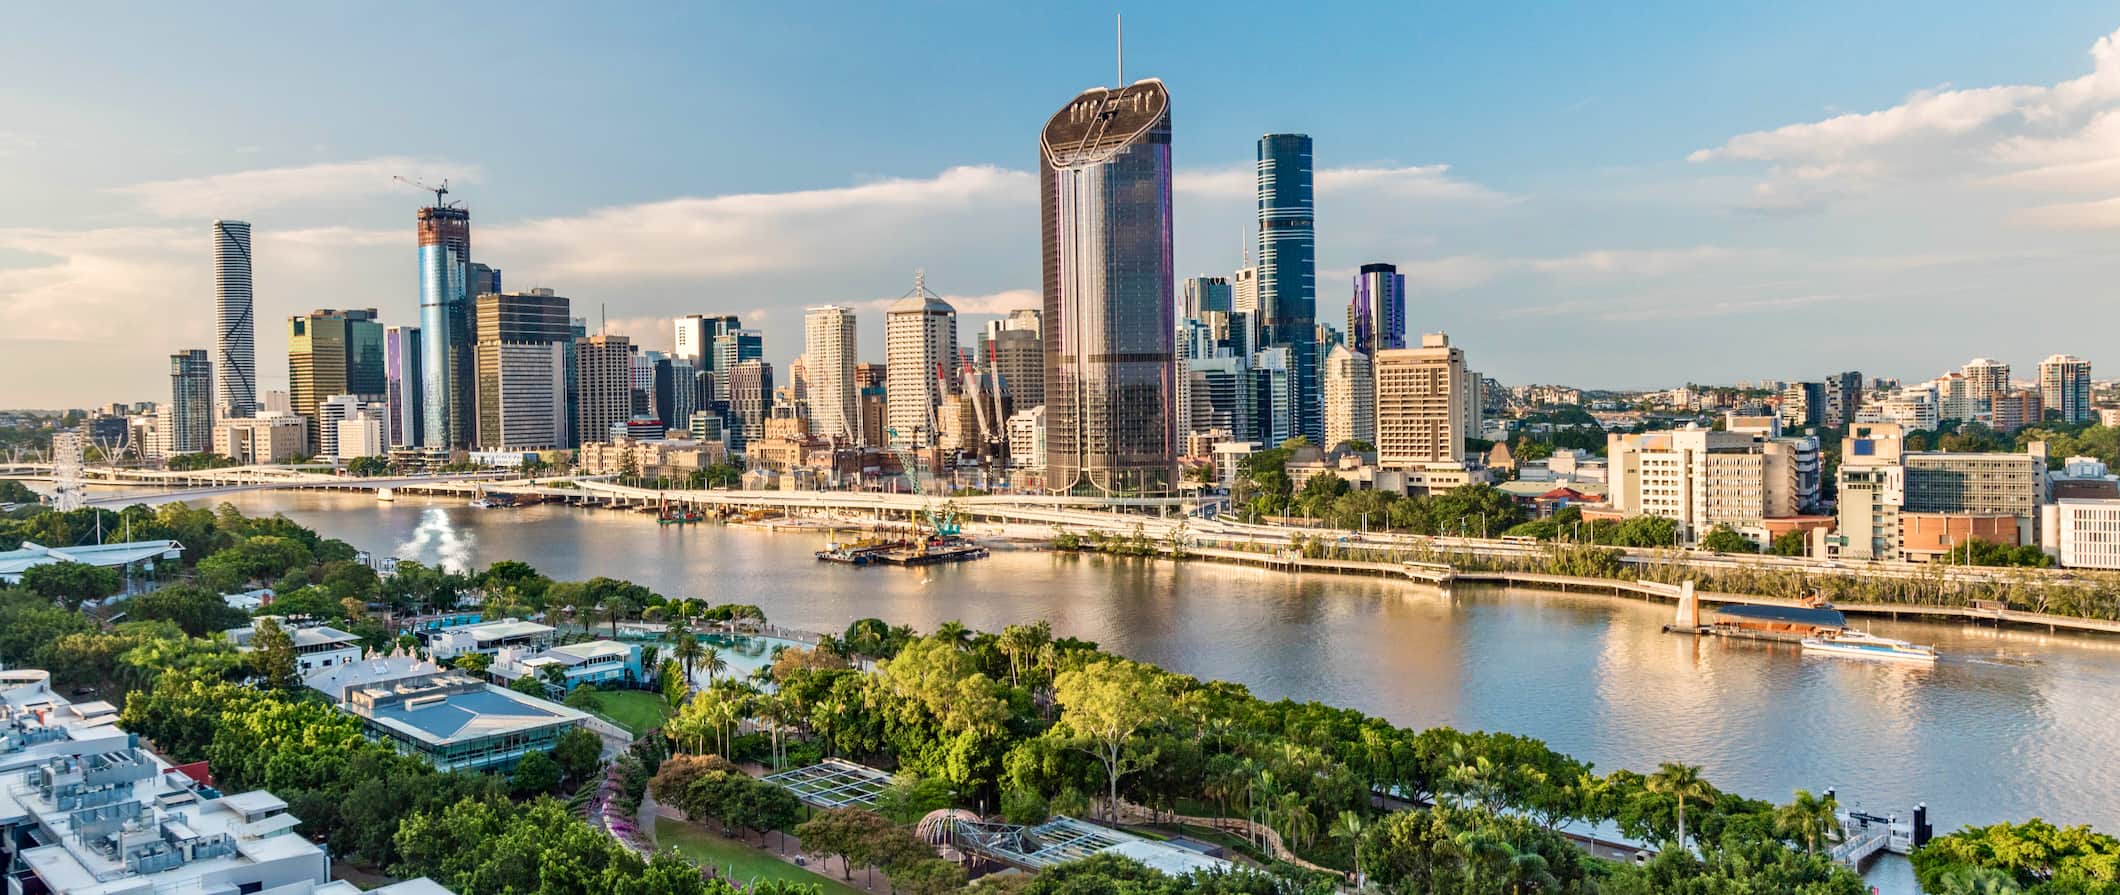 The towering skyline of Brisbane, Australia with lots of greenery across the river